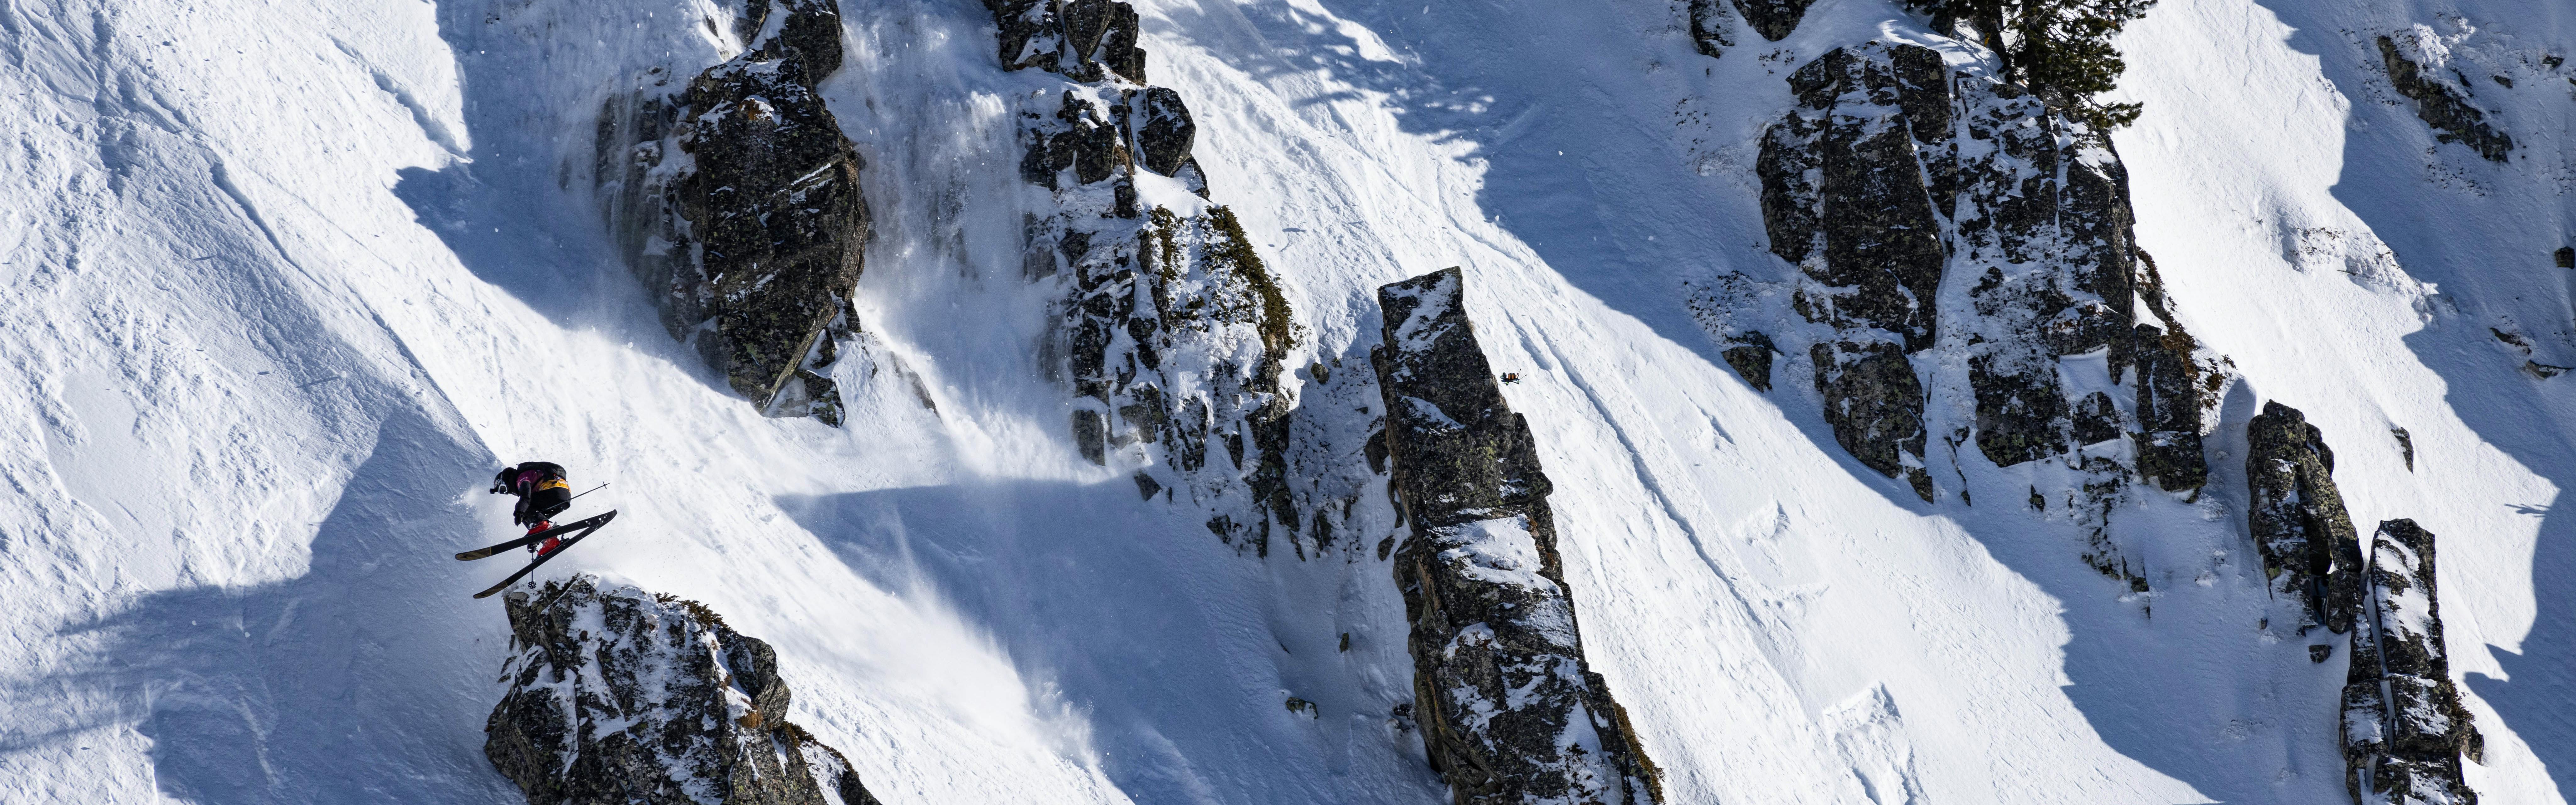 A skier jumps while on a near-vertical mountain.